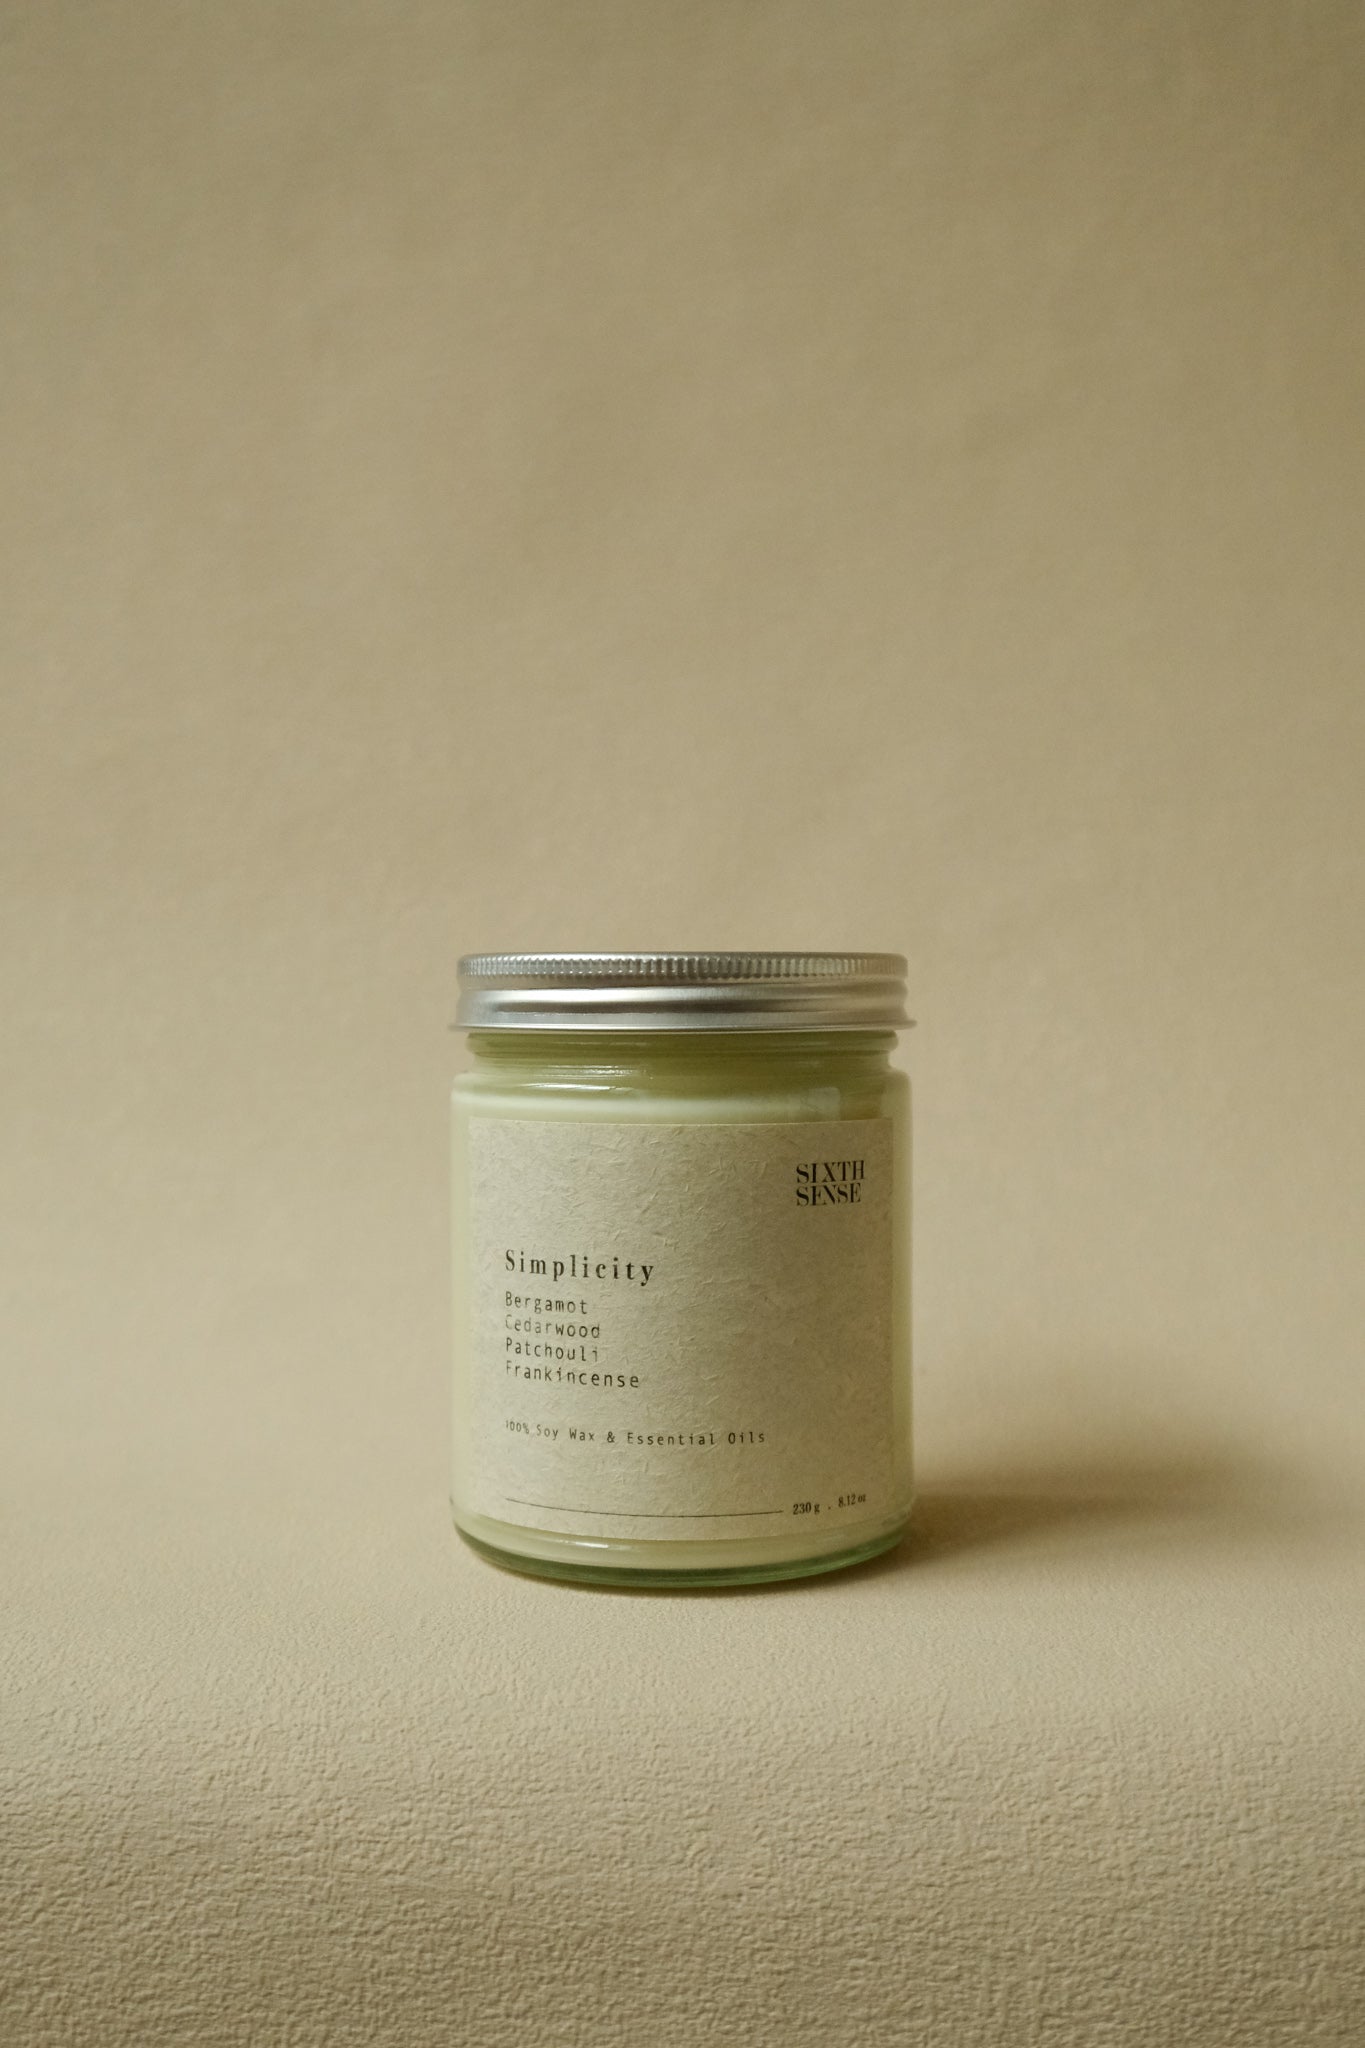 Simplicity Aromatic Soy Wax Candle